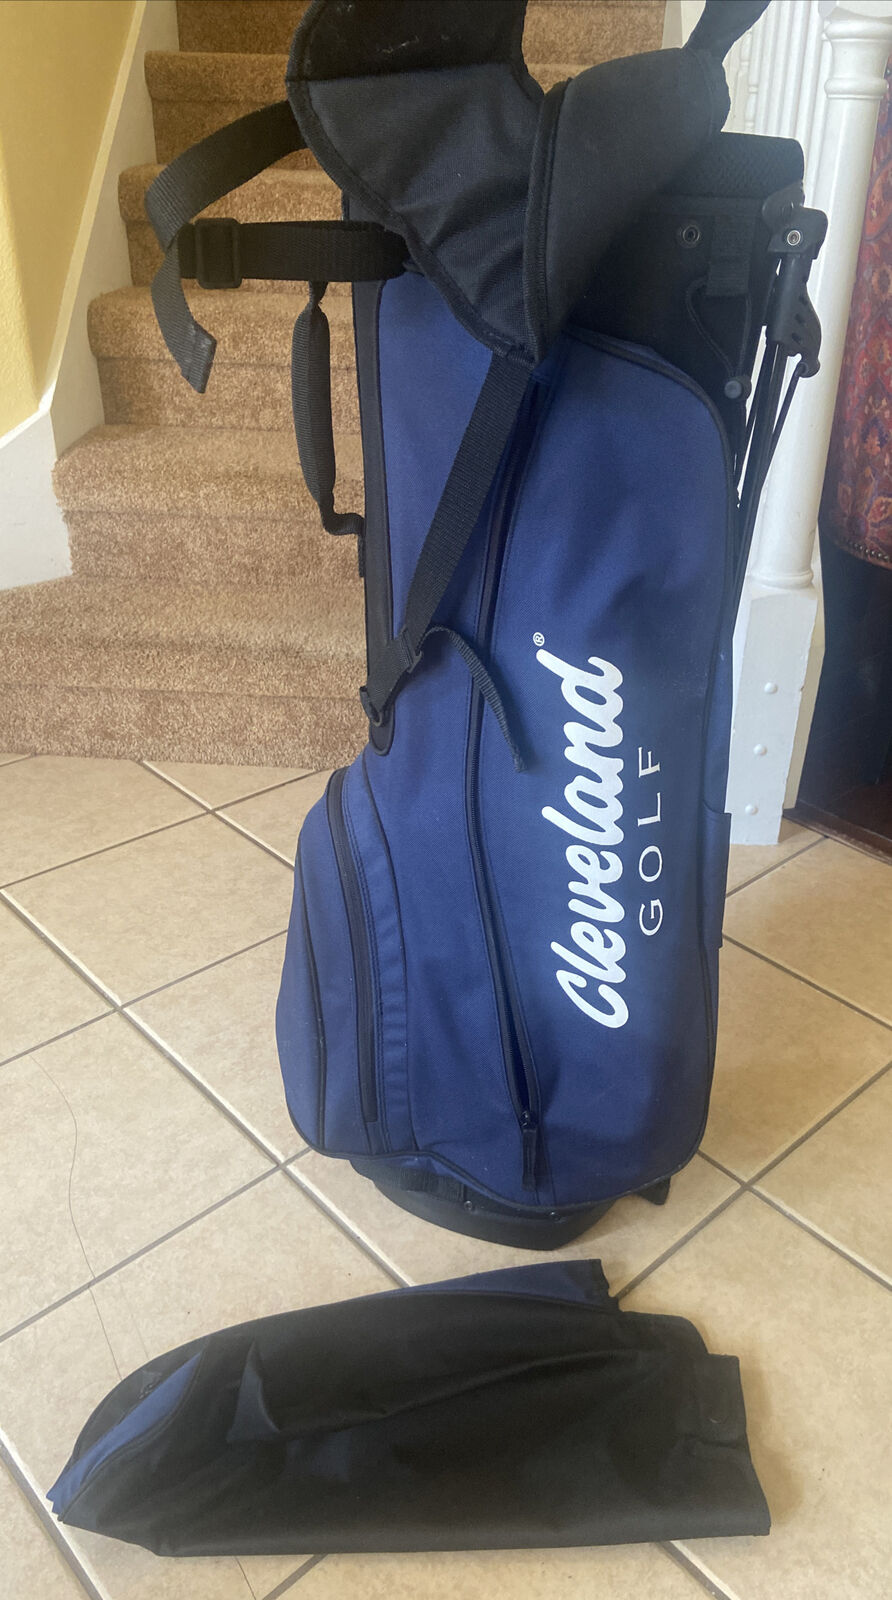 Really Well MadeCleveland CG Stand Lightweight Bag, Black And Navy.